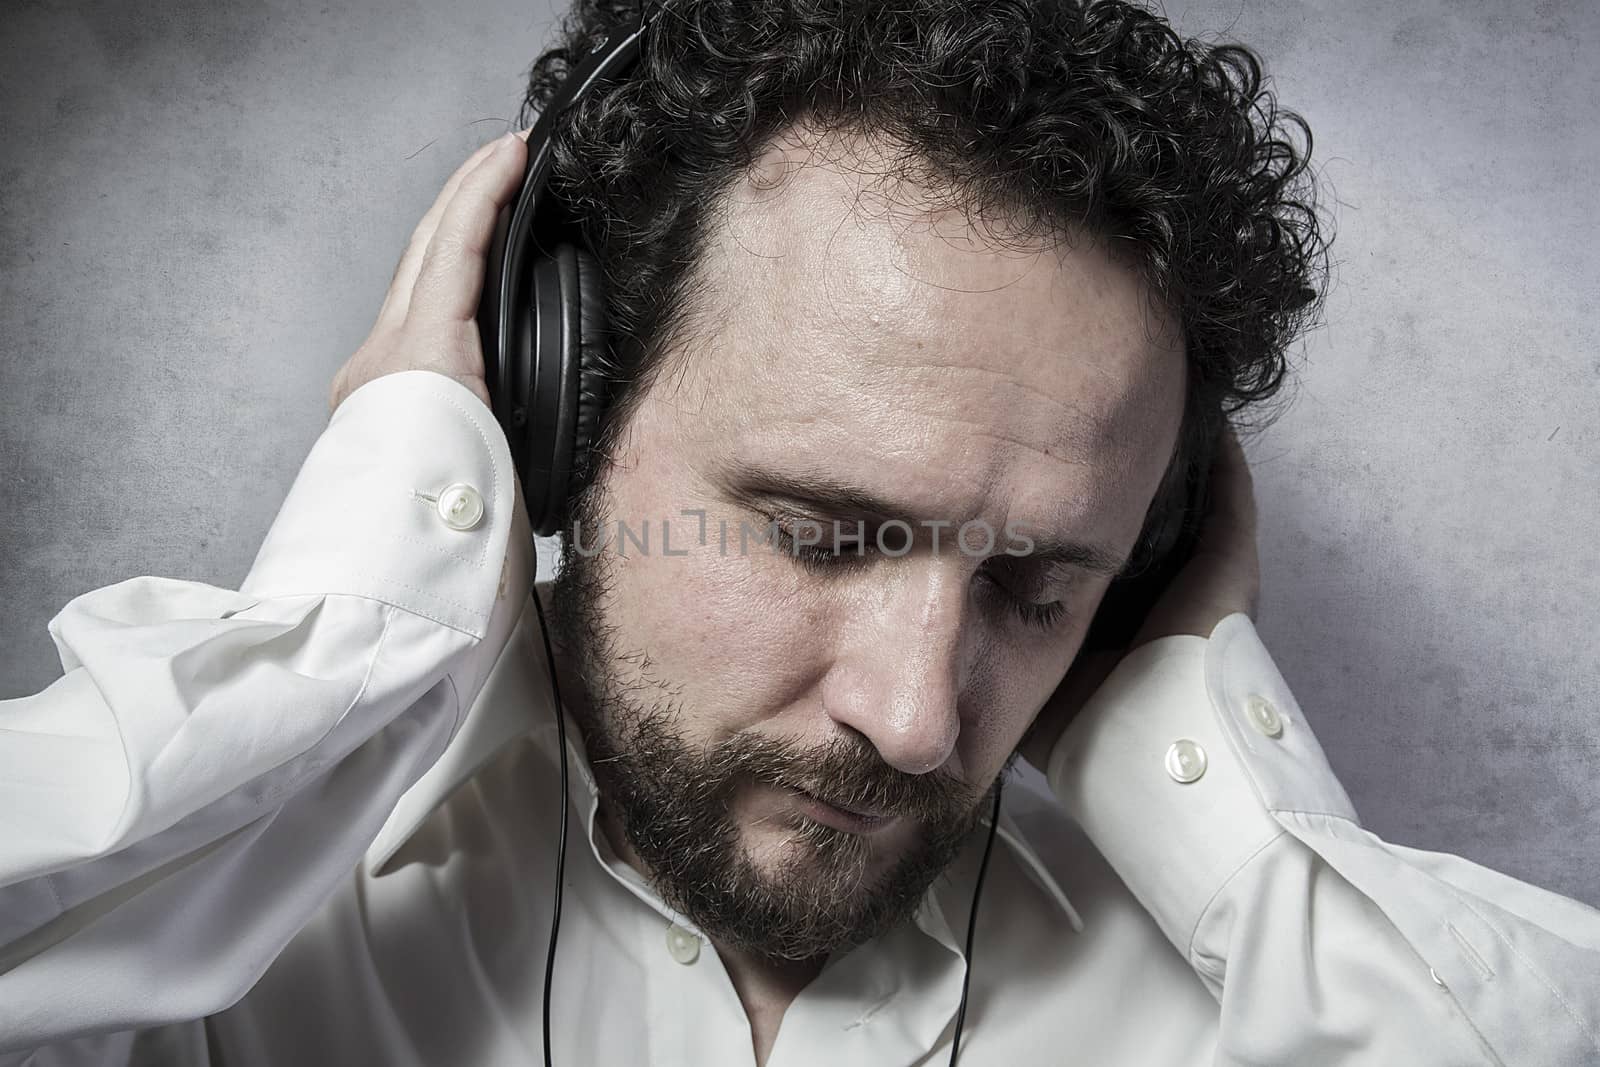 listening and enjoying music with headphones, man in white shirt with funny expressions